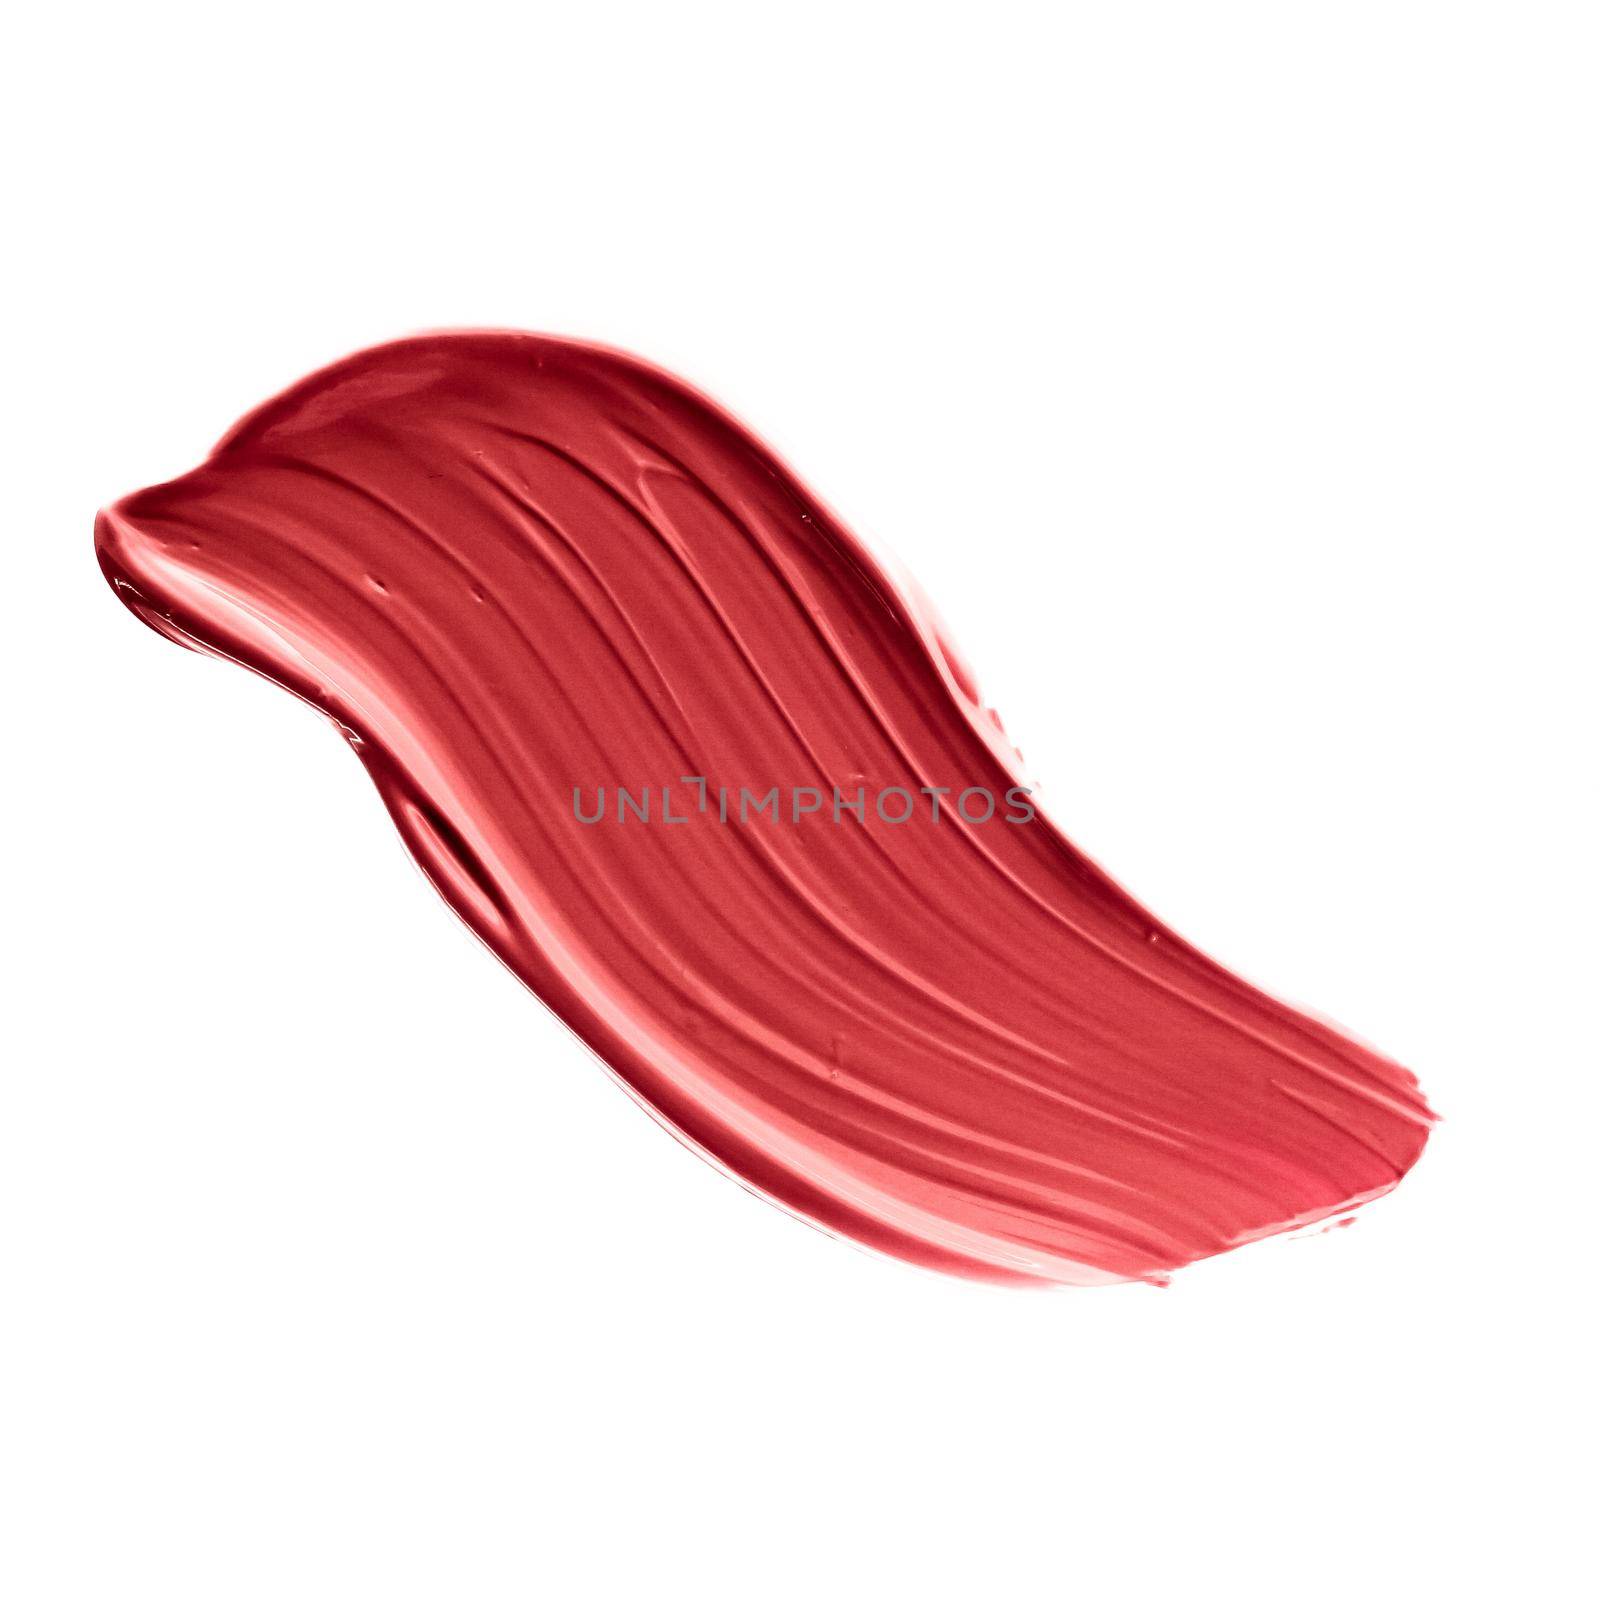 Cosmetic products, fashion and beauty concept - Lipstick smudge isolated on white background, art of make-up